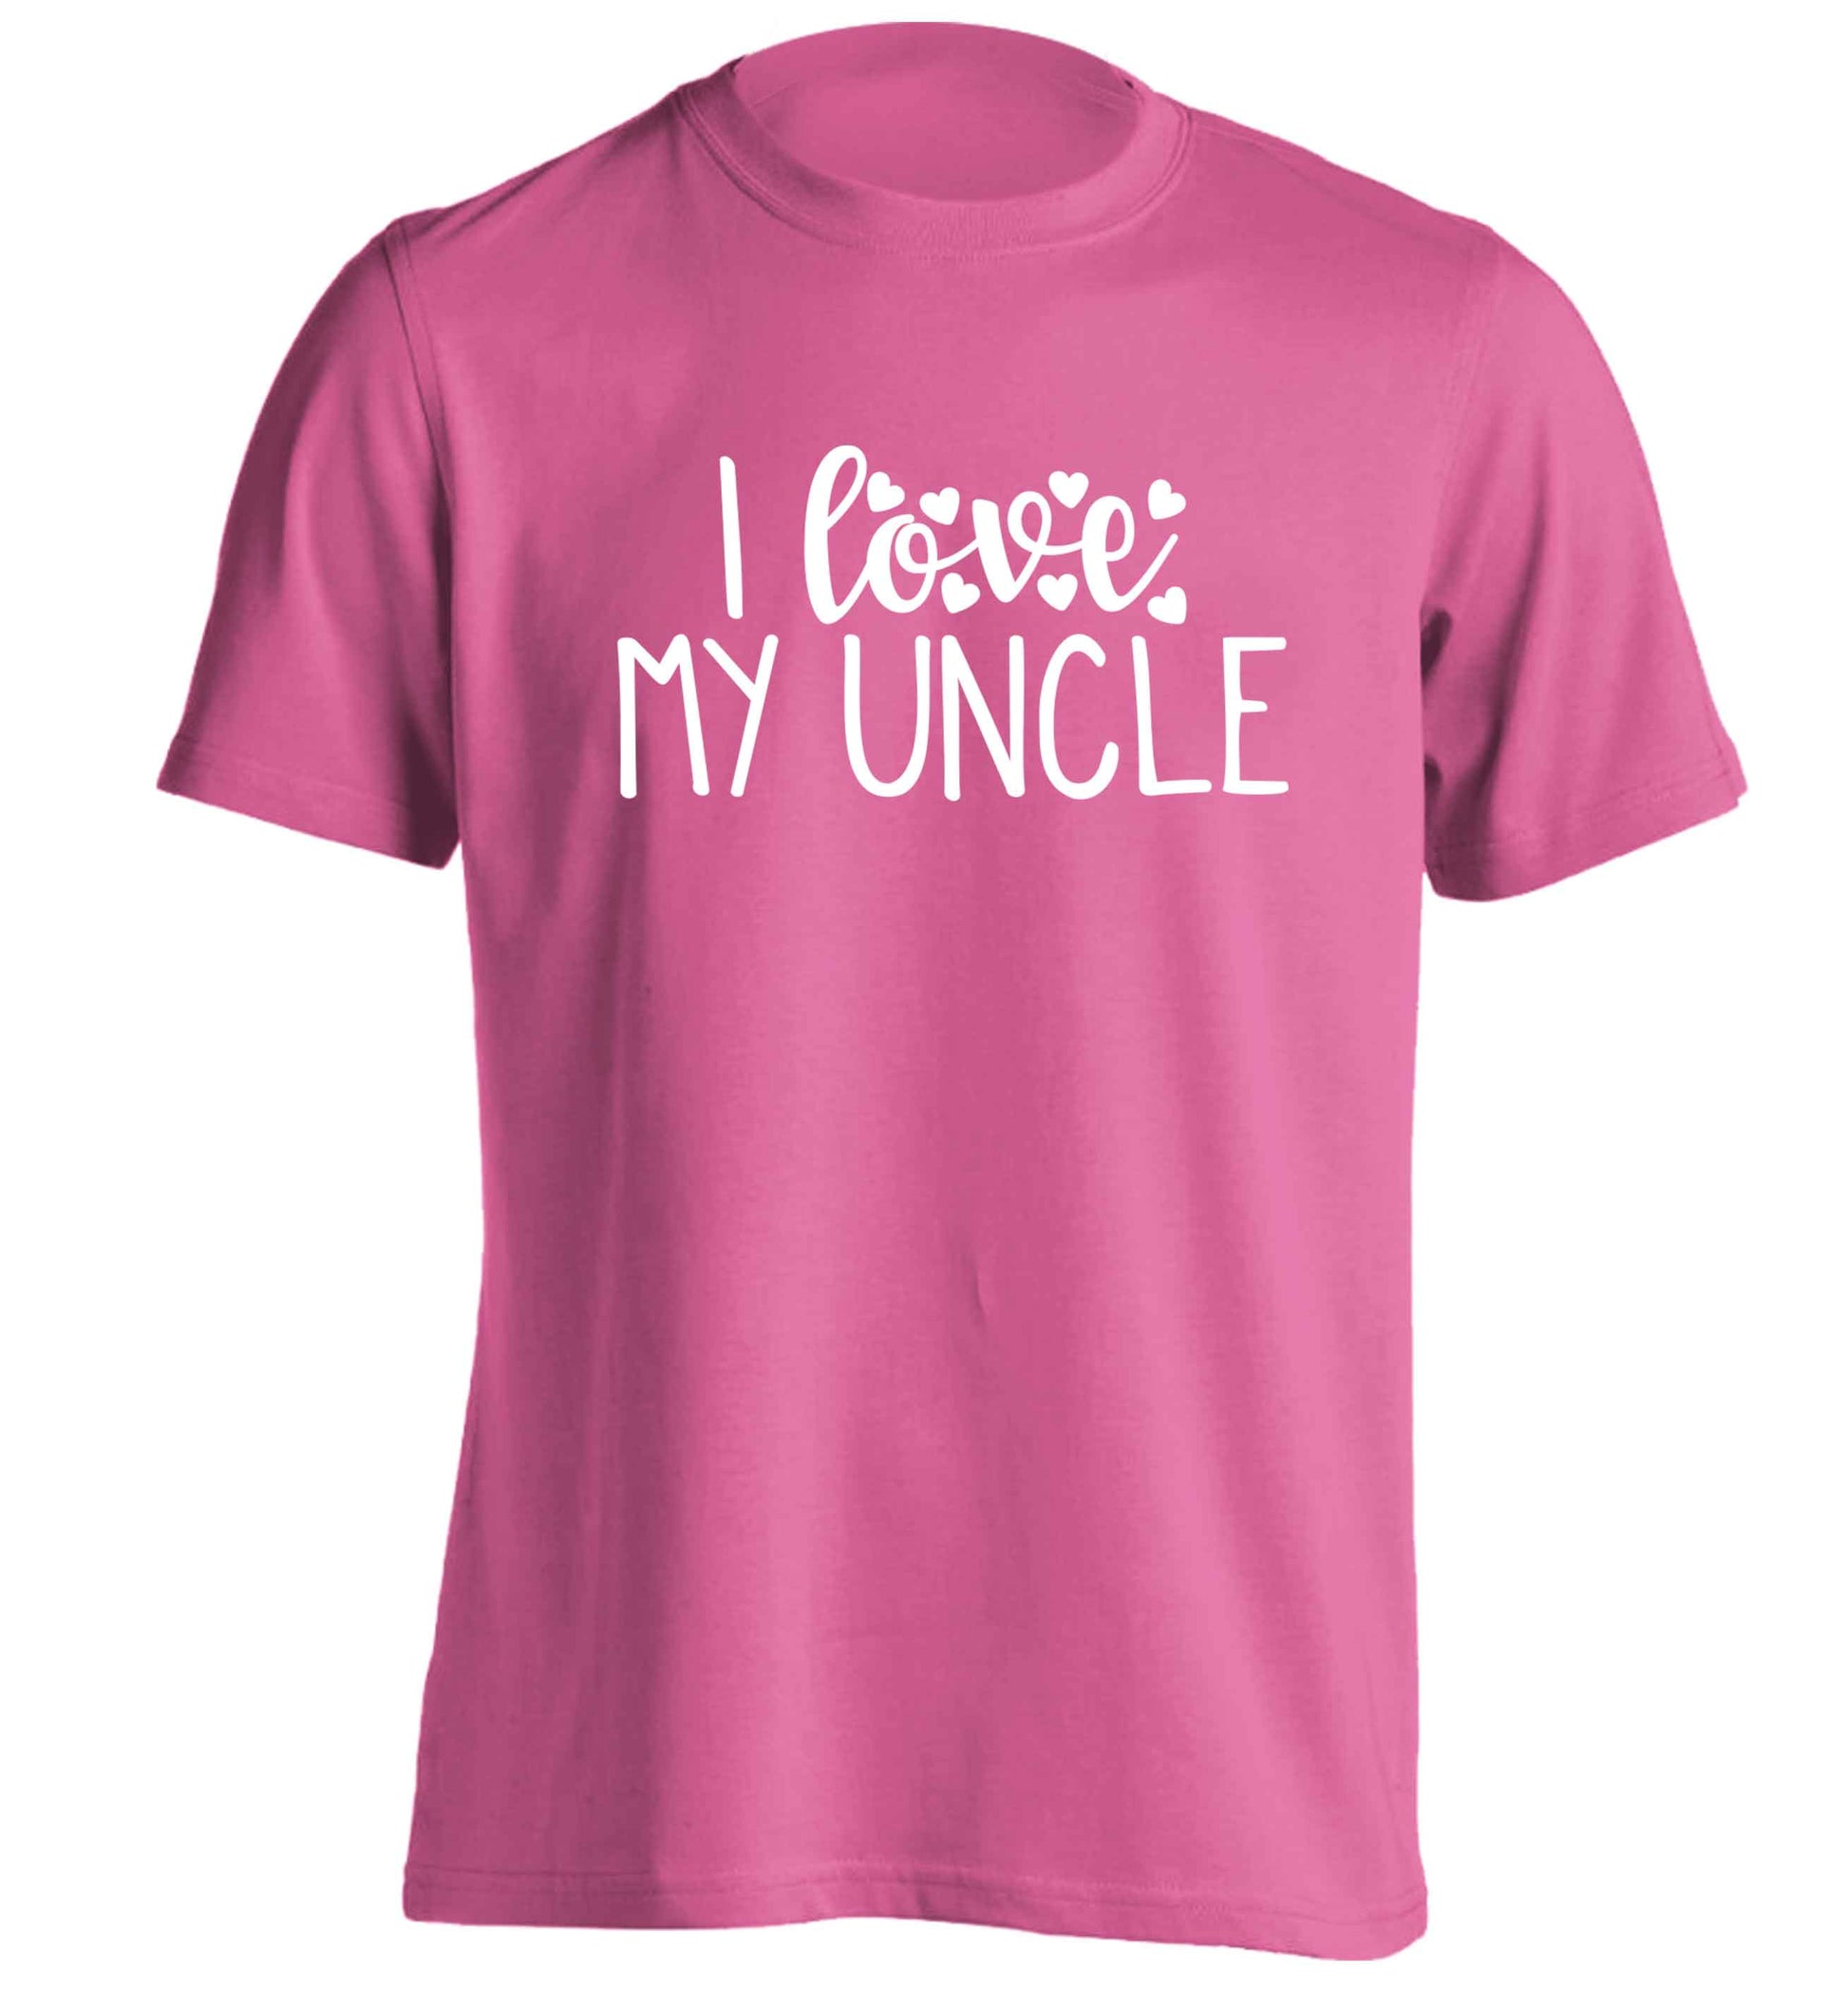 I love my uncle adults unisex pink Tshirt 2XL